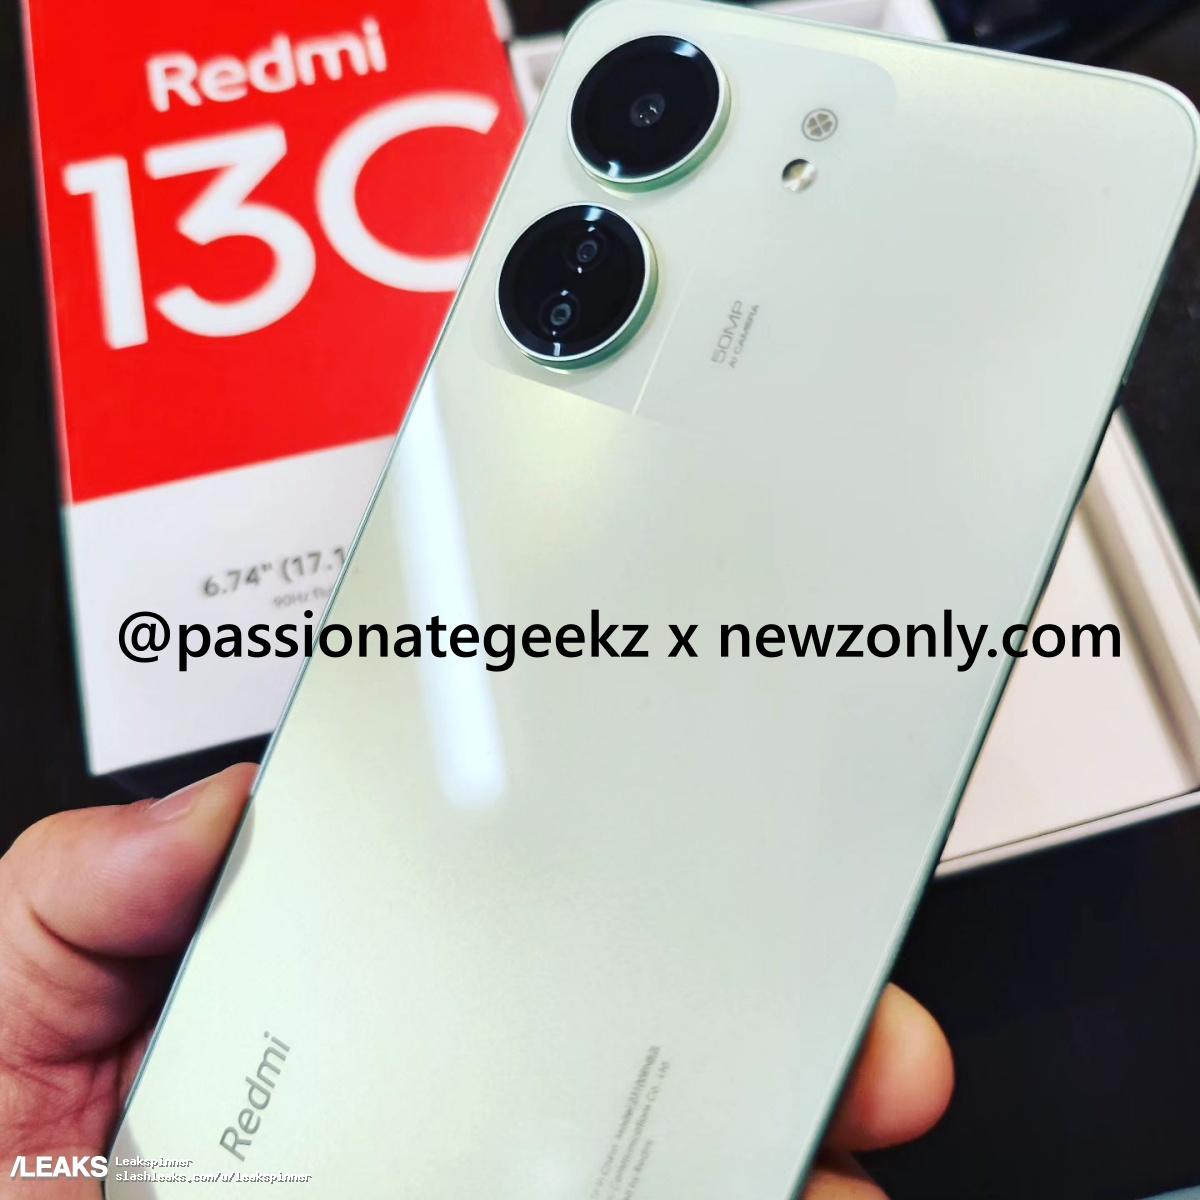 Redmi 13C leaks in live images along with retail box - Gizmochina